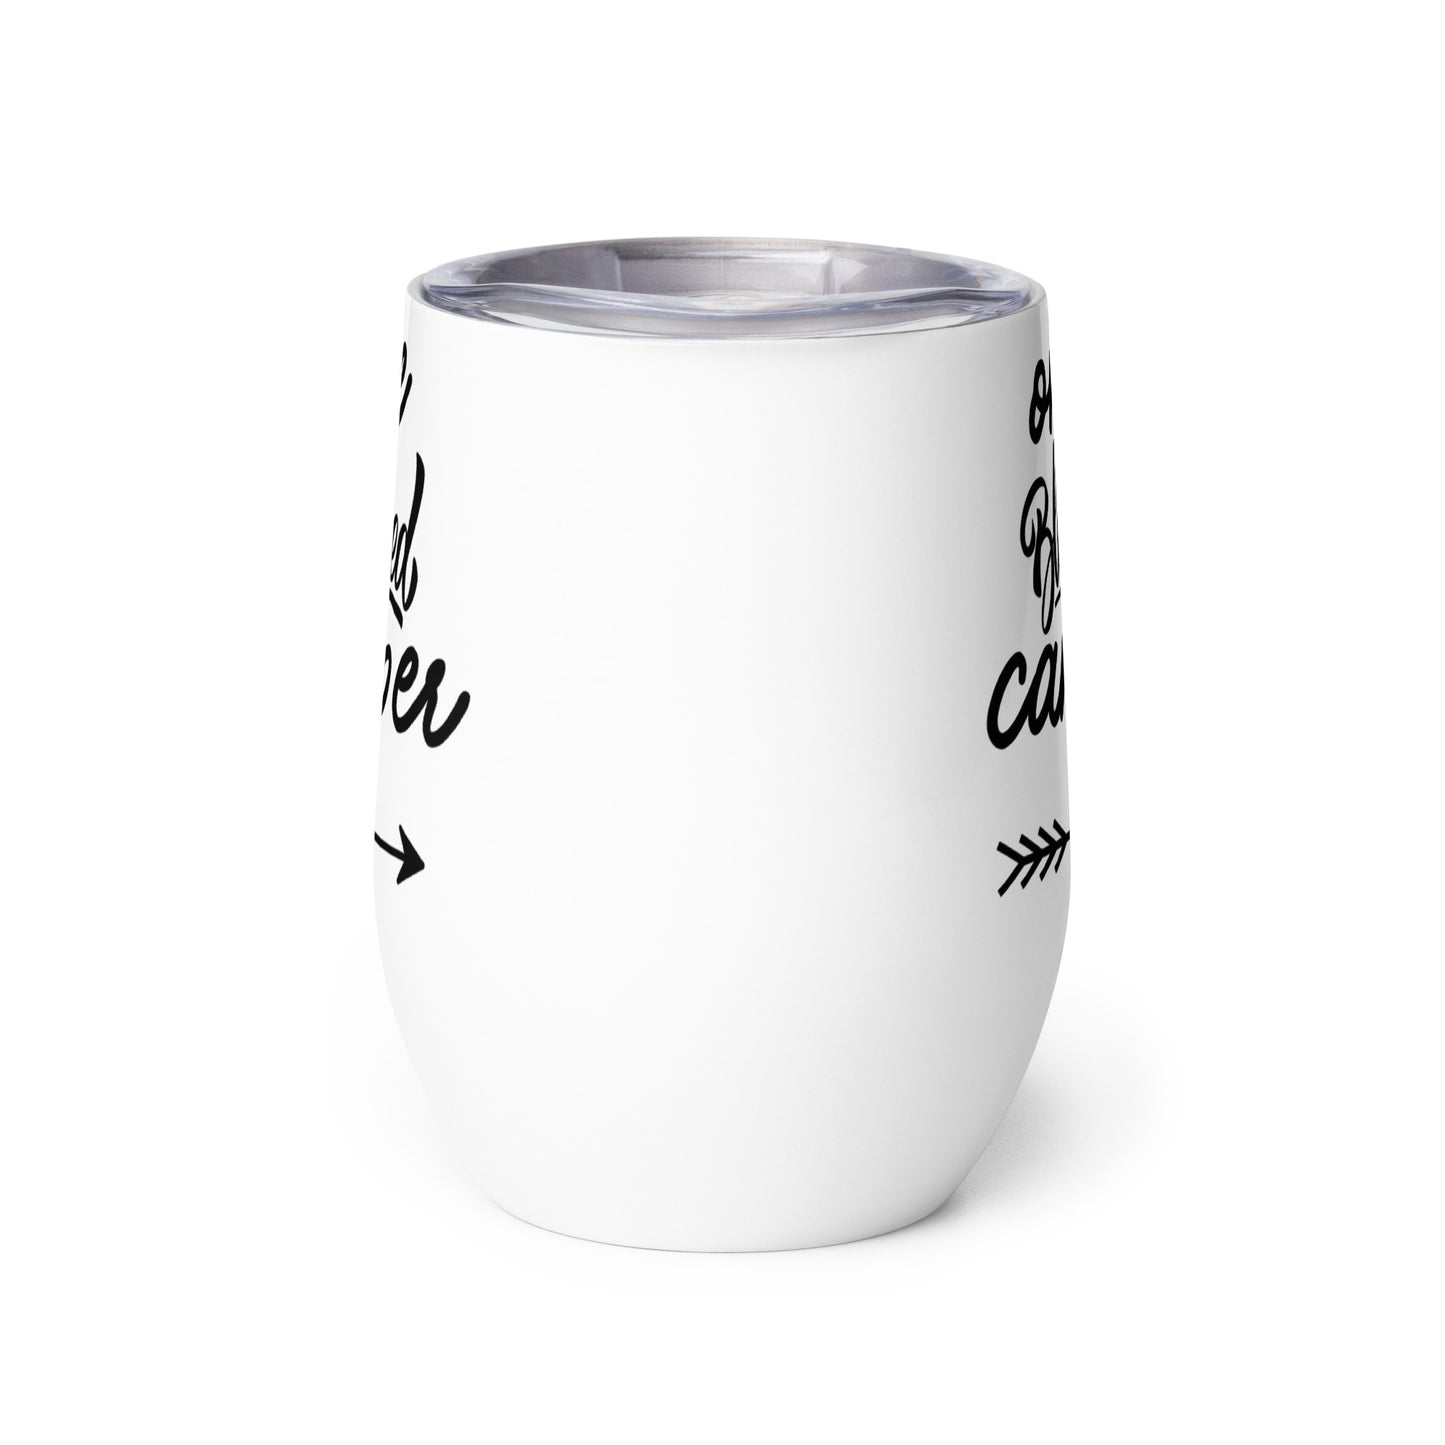 ONE BLESSED CAMPER wine tumbler